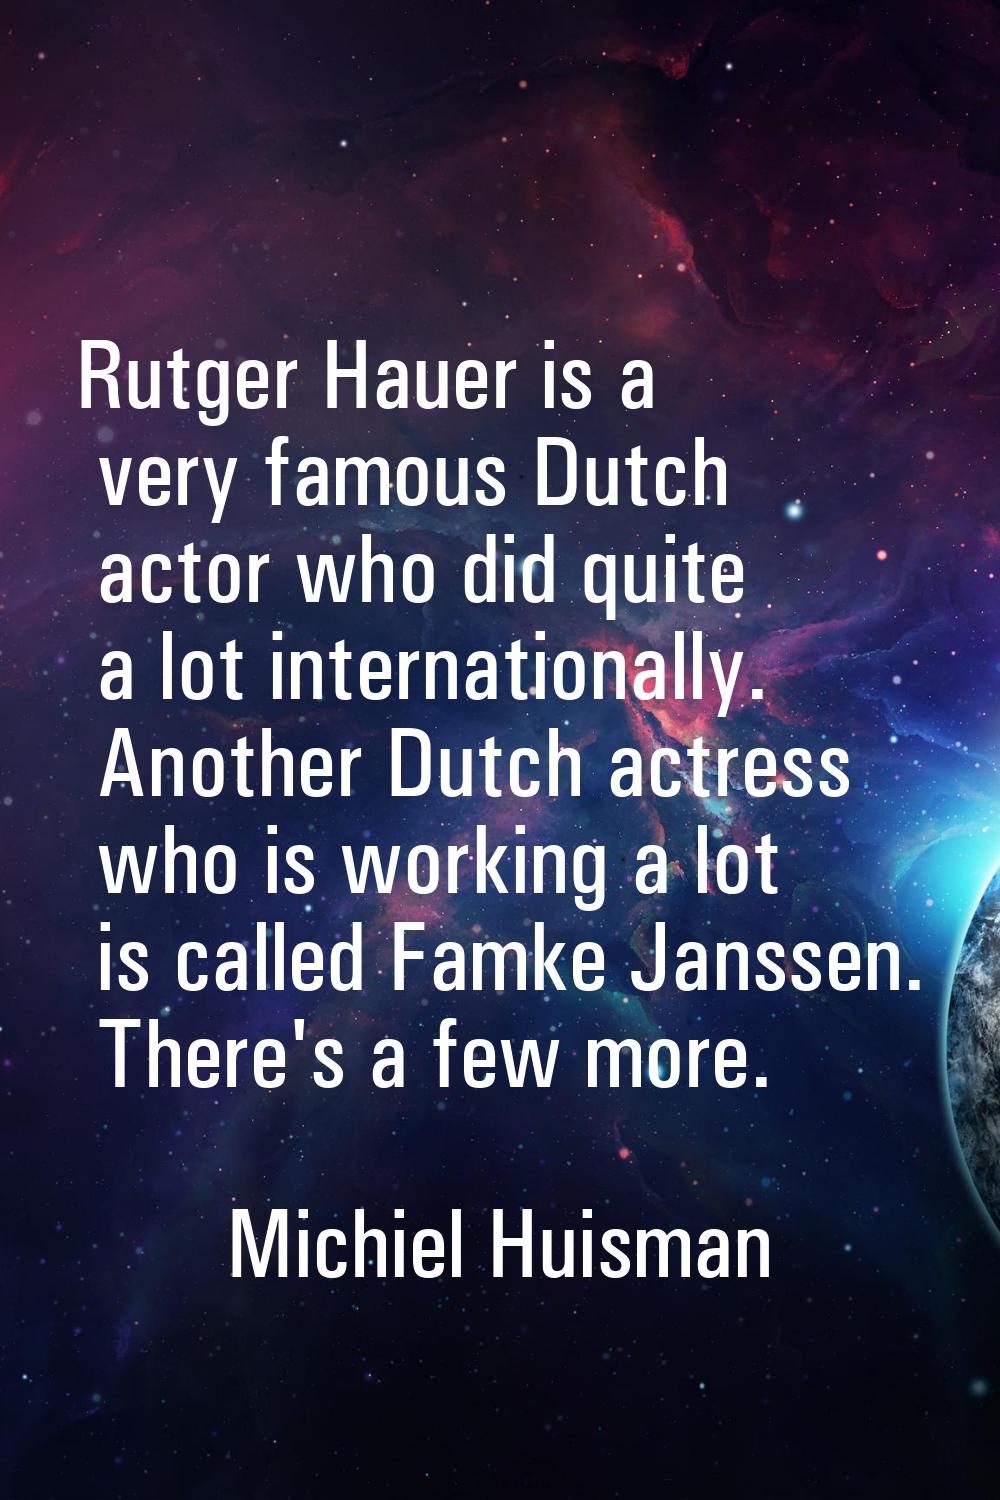 Rutger Hauer is a very famous Dutch actor who did quite a lot internationally. Another Dutch actres